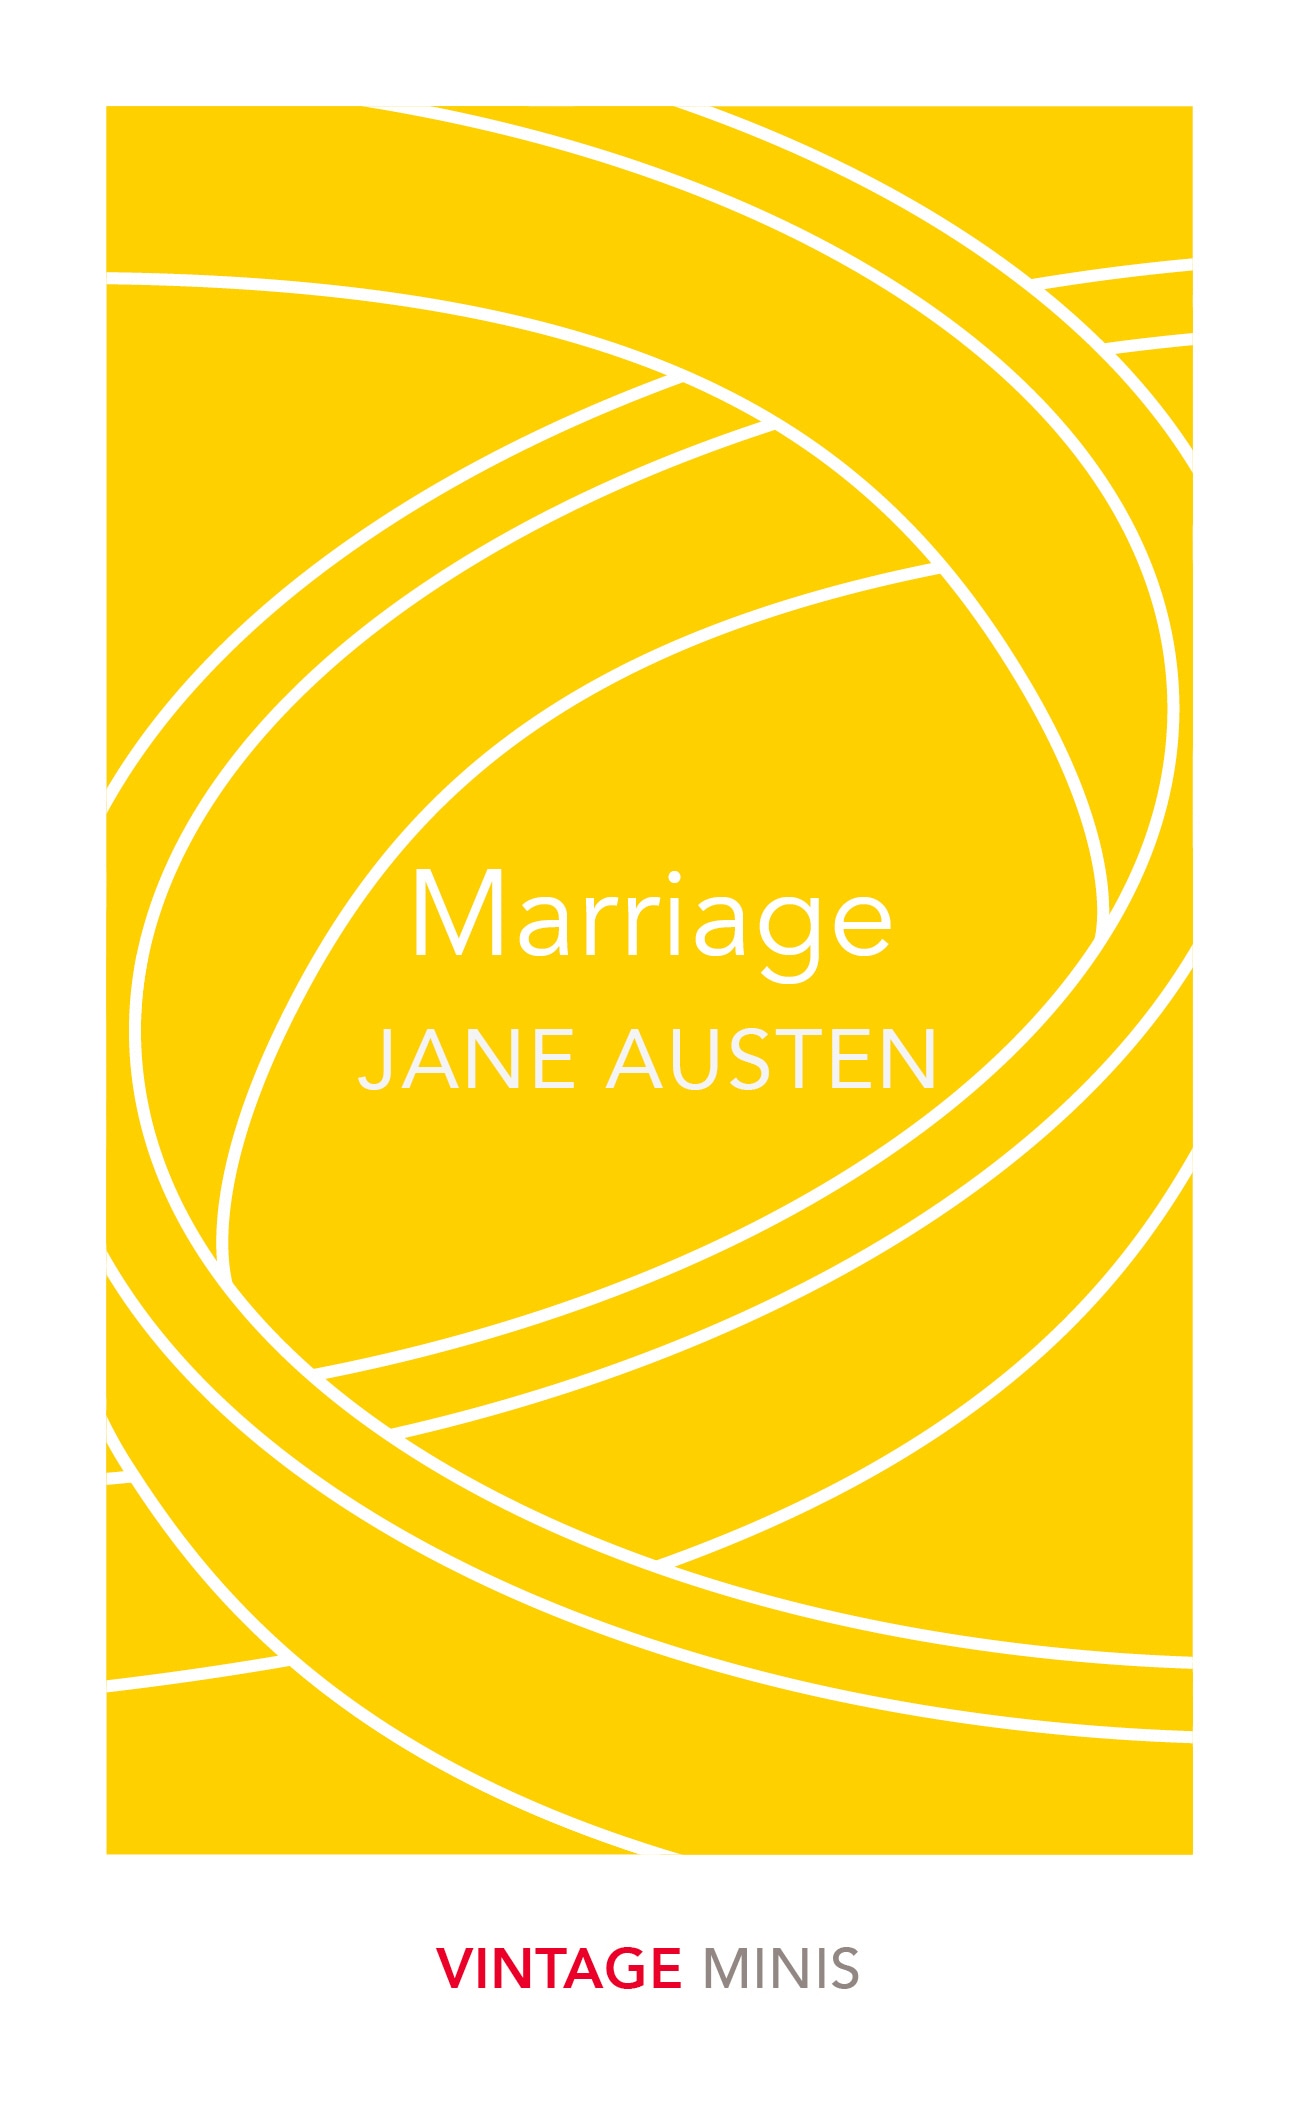 Book “Marriage” by Jane Austen — April 5, 2018